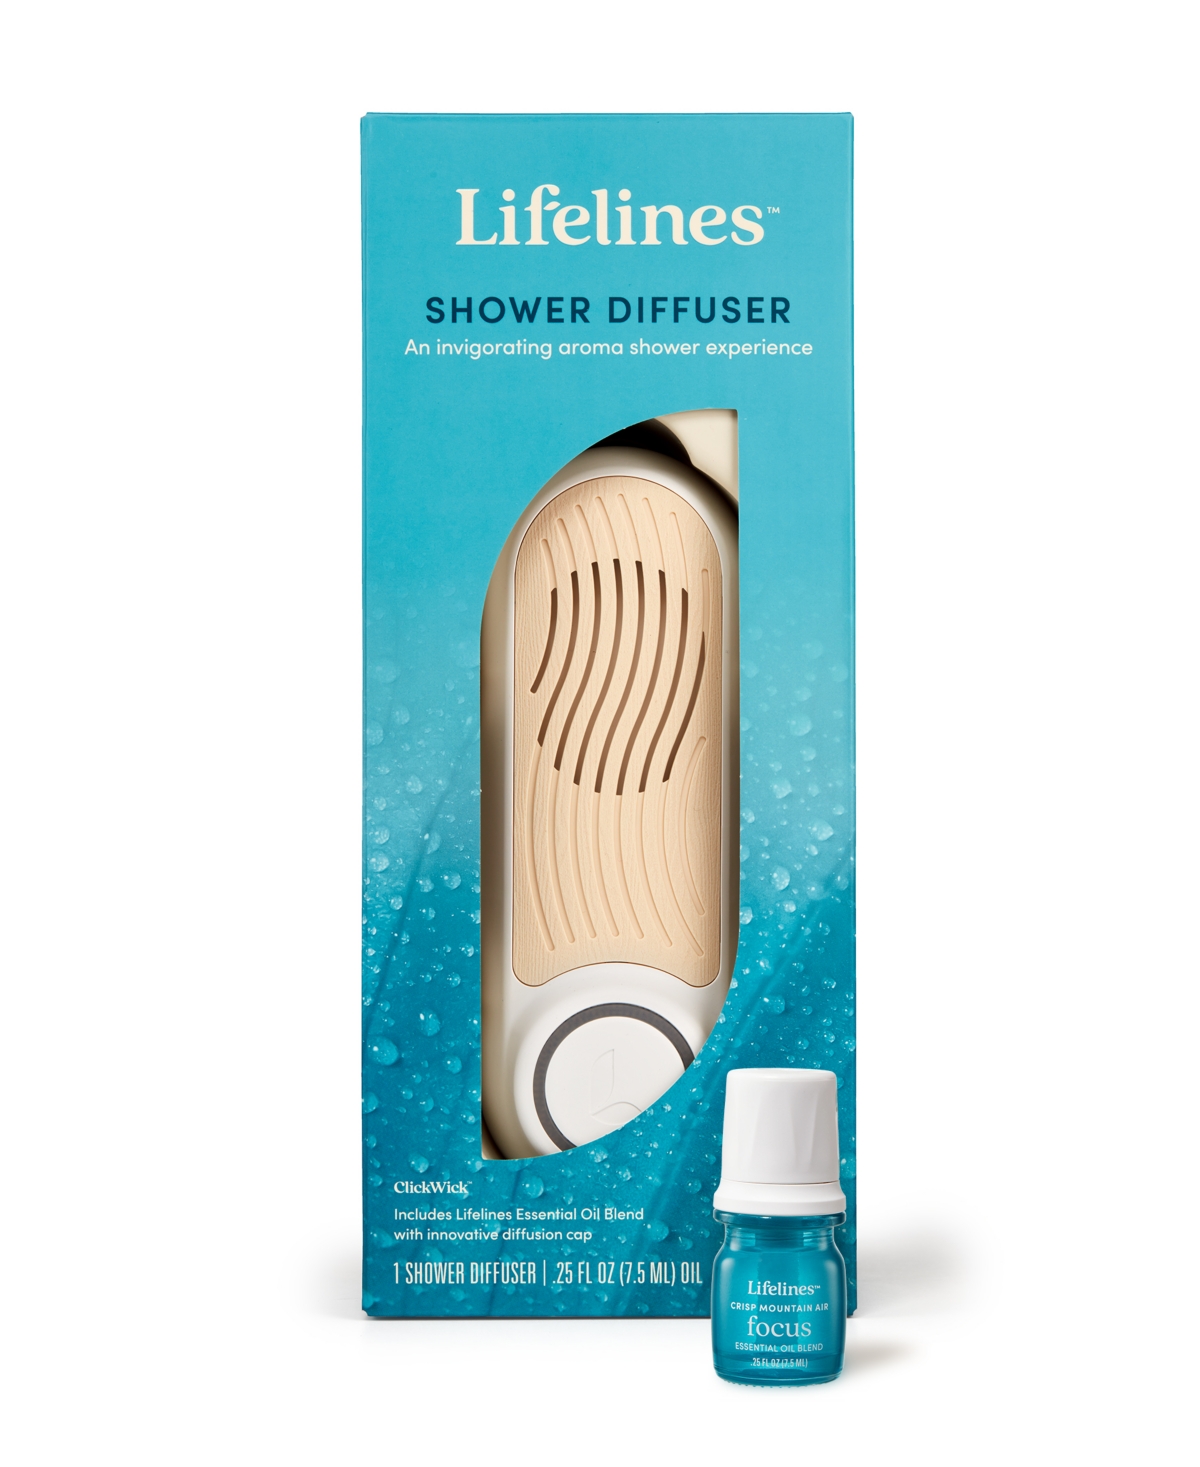 Shower Diffuser Plus Essential Oil Blend - Light Brown and White